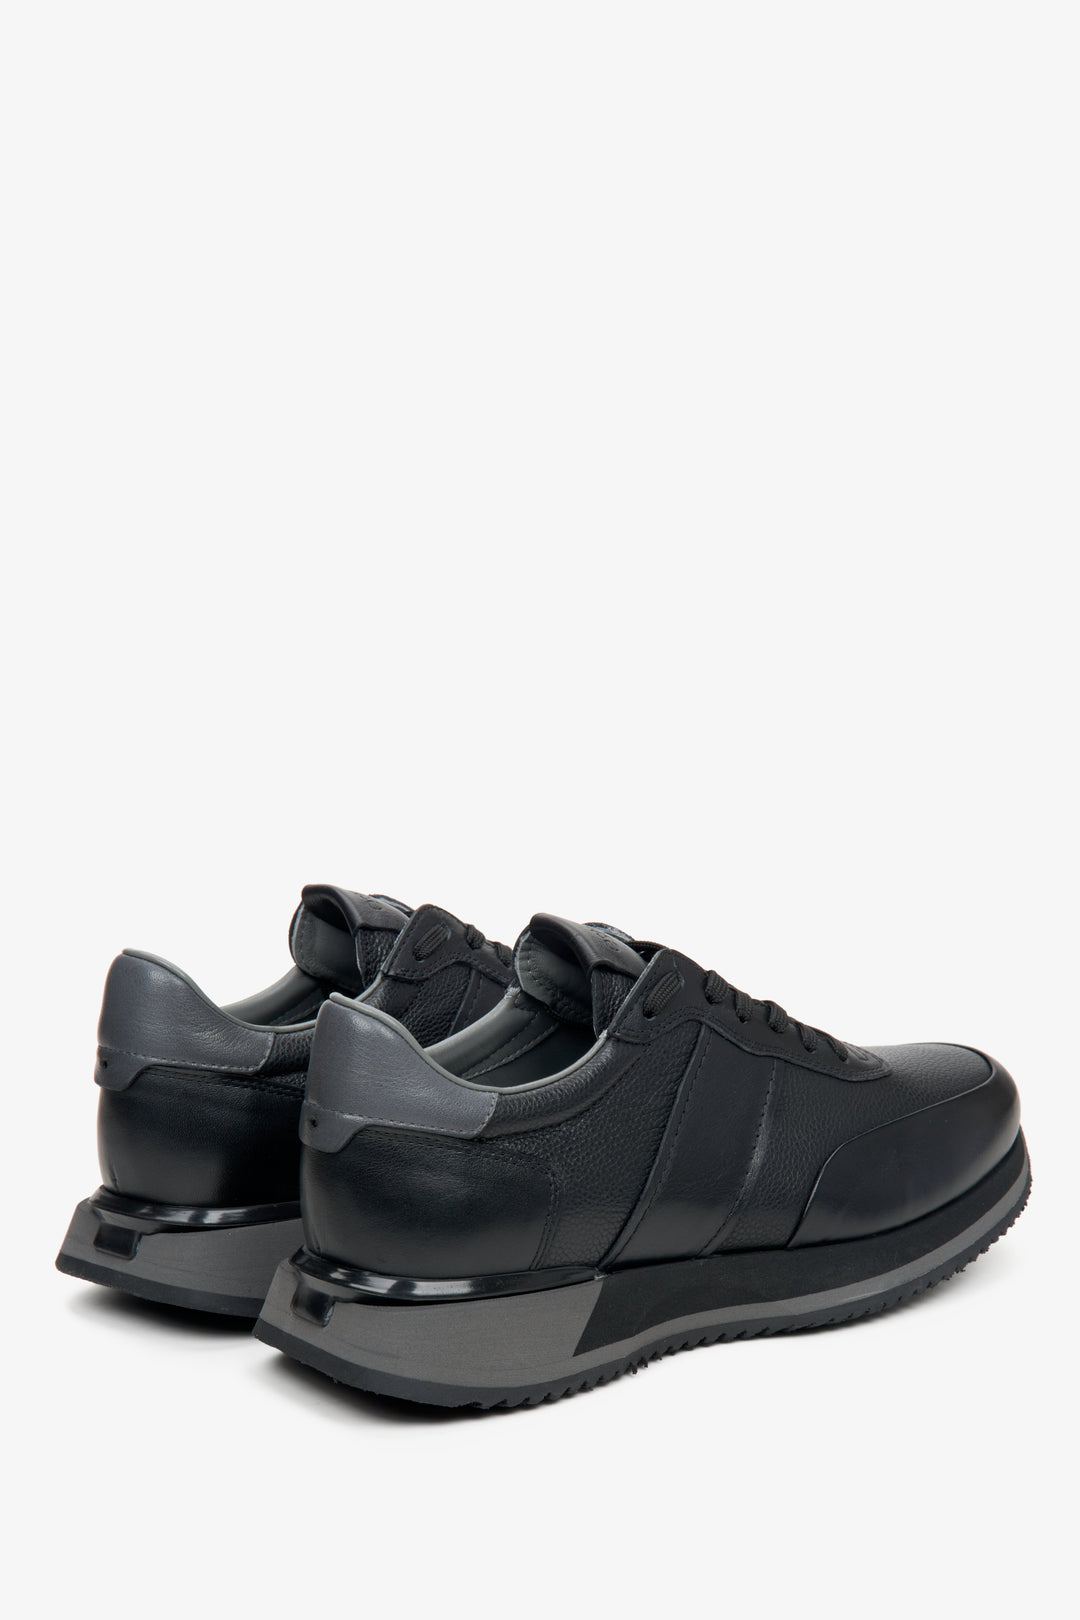 Men's black leather sneakers by Estro - close-up on the side line and heel.